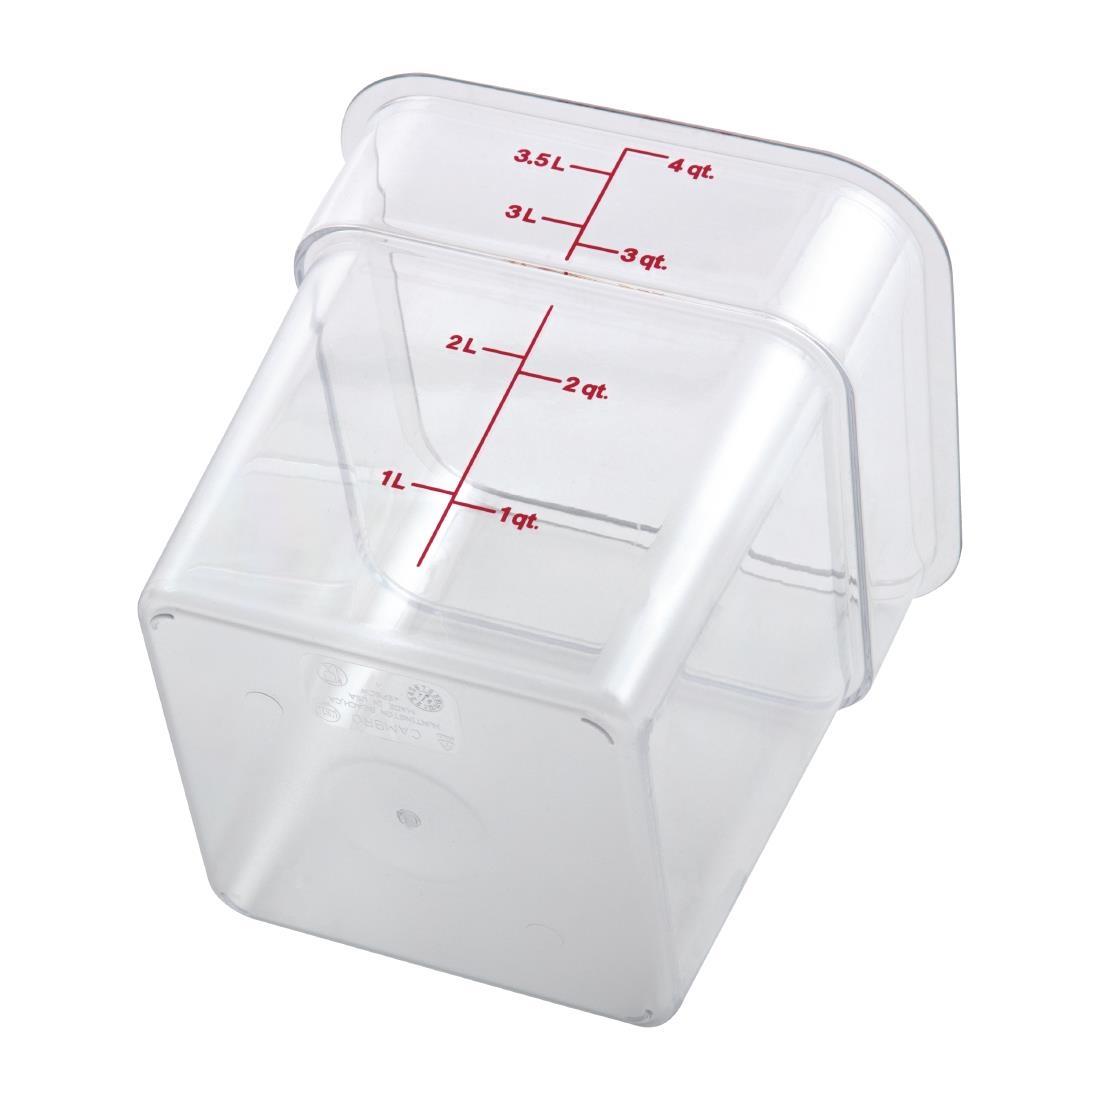 Cambro Square Polycarbonate Food Storage Container 3.8 Ltr - DT196  - 4